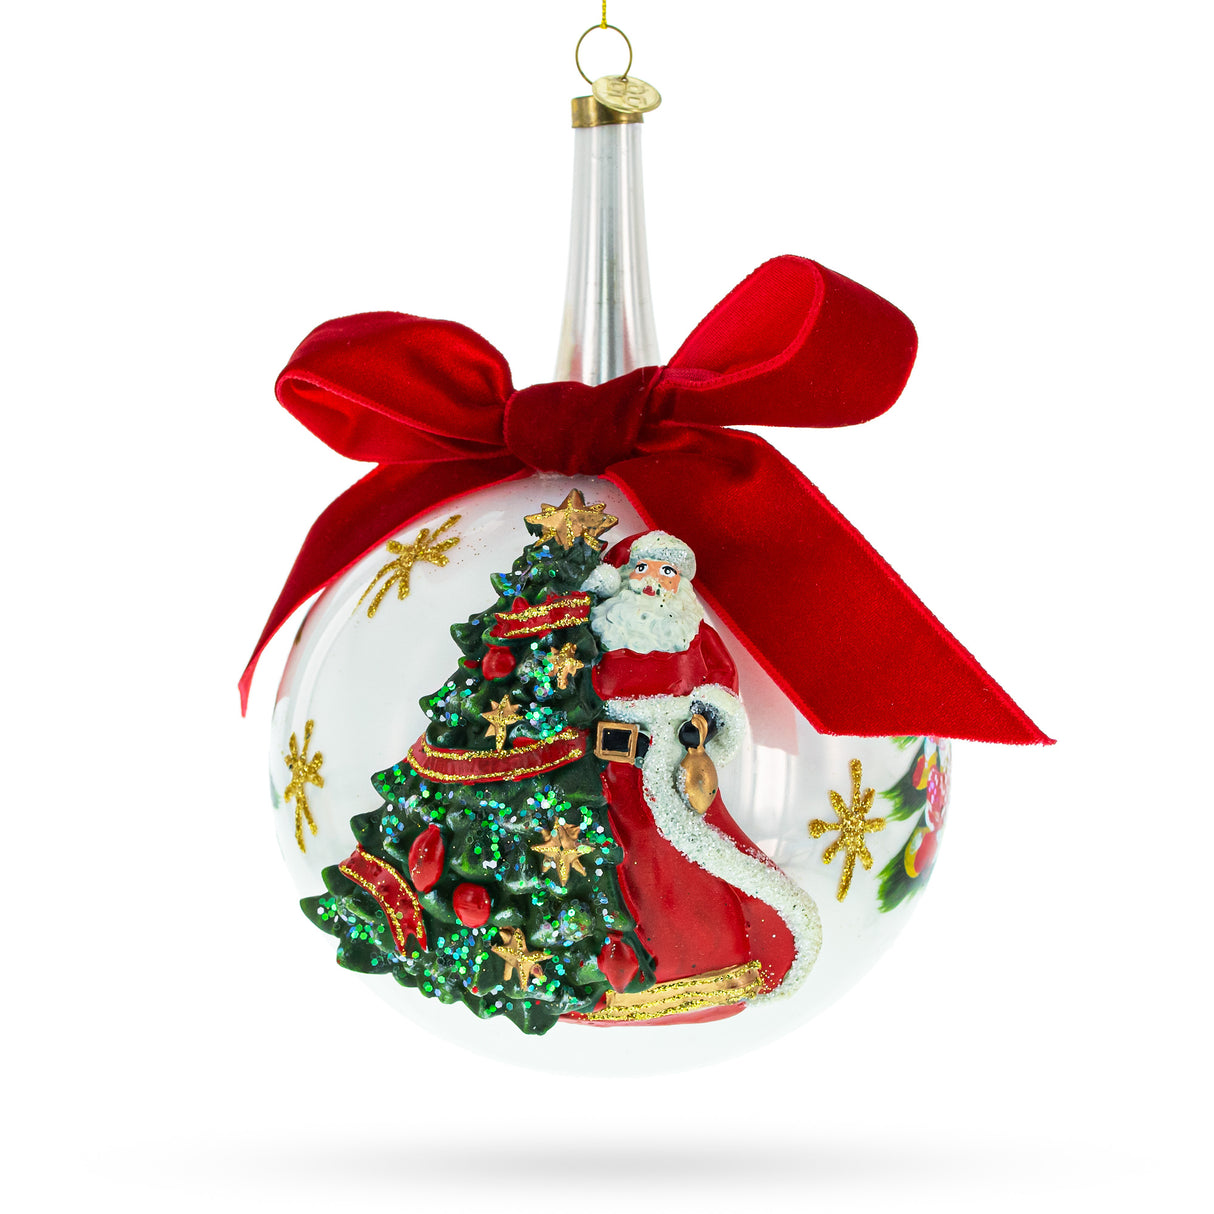 Glass Santa by Tree with Red Bow - Festive Blown Glass Ball Christmas Ornament in White color Round